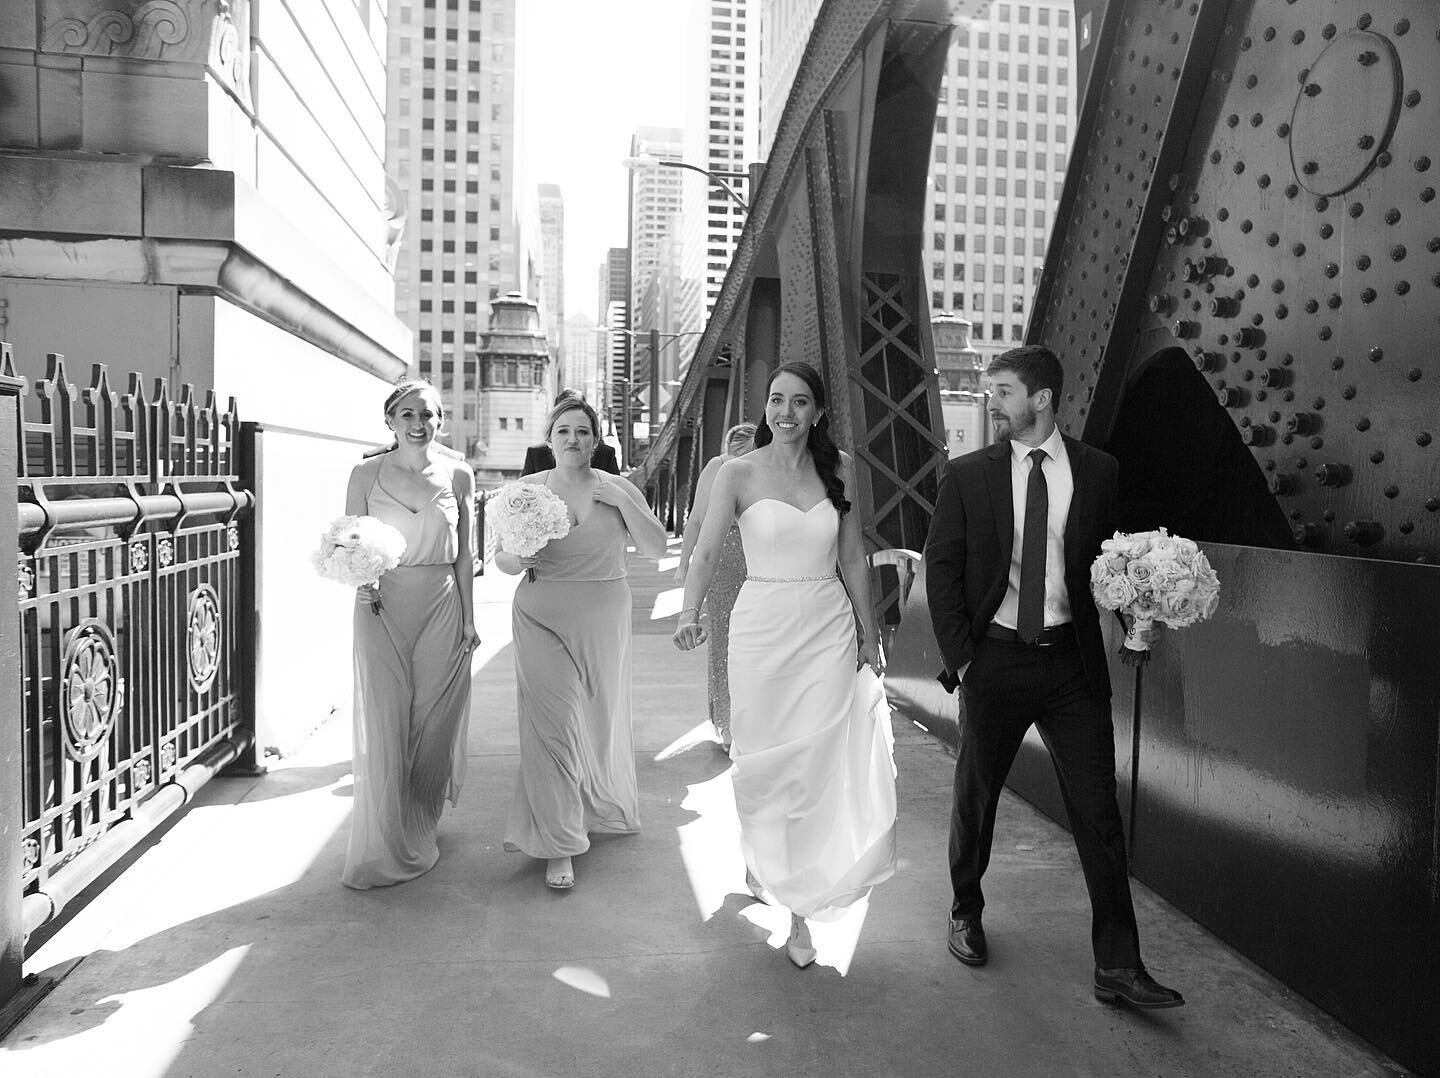 Love seeing this groom help hold his brides boutique while she holds her train - looking cool, calm and collected in downtown Chicago.